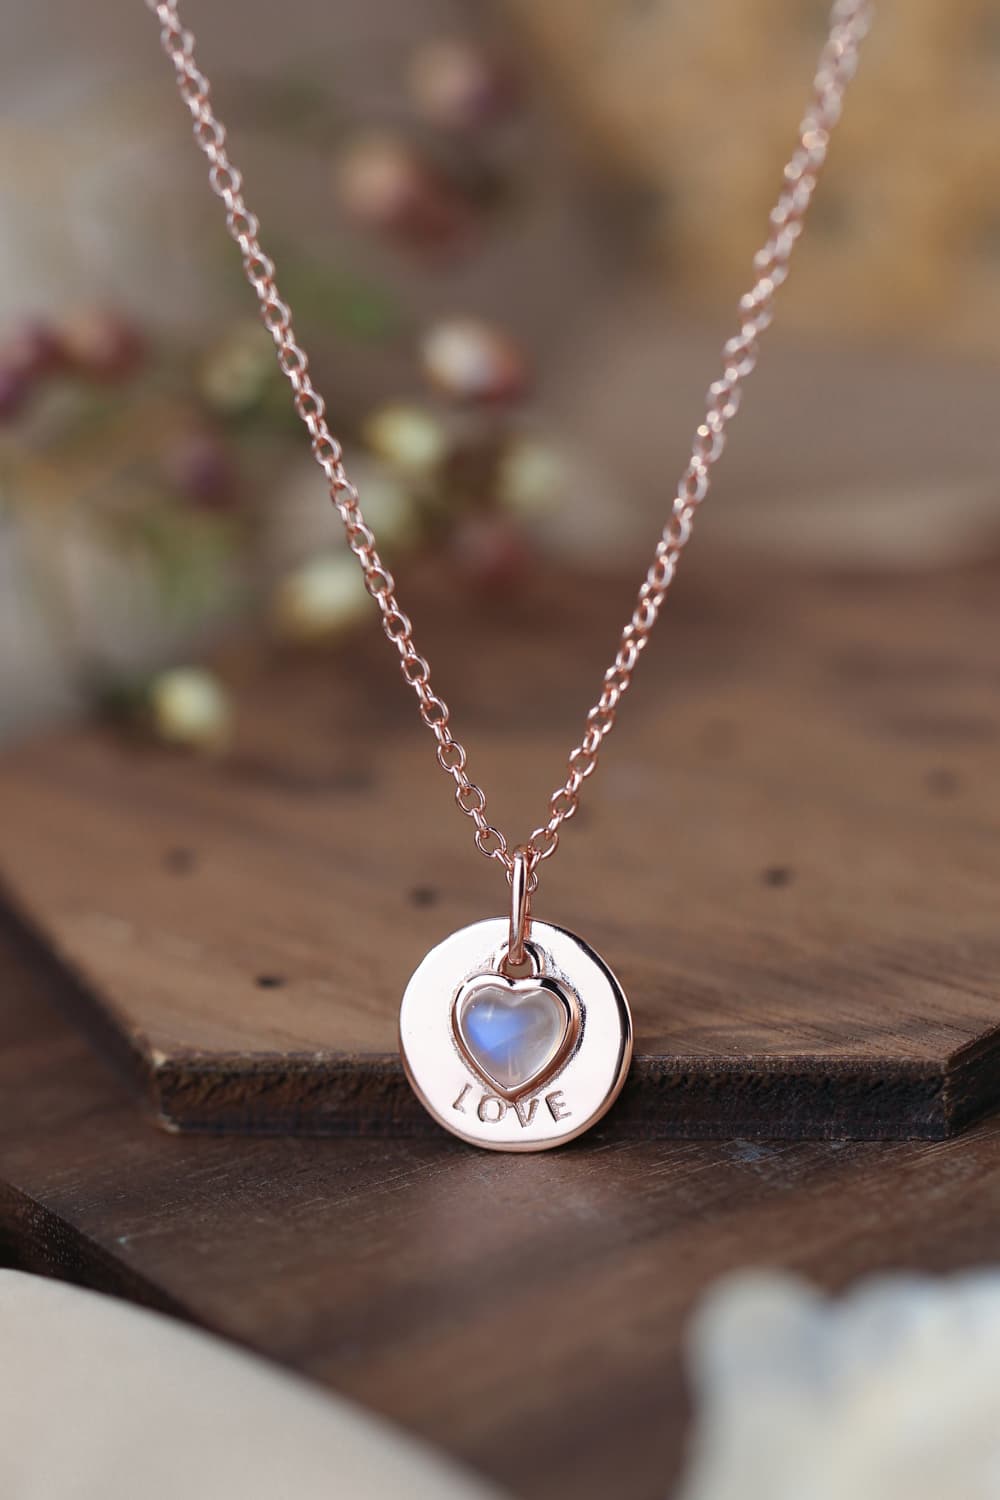 "Photograph of a Moonstone LOVE Heart Pendant hanging from a delicate 925 Sterling Silver Necklace. The heart-shaped pendant showcases a luminous moonstone with captivating blue and white hues, exuding an ethereal glow. The necklace's intricate silver chain complements the pendant's elegance. A perfect blend of nature's beauty and craftsmanship."